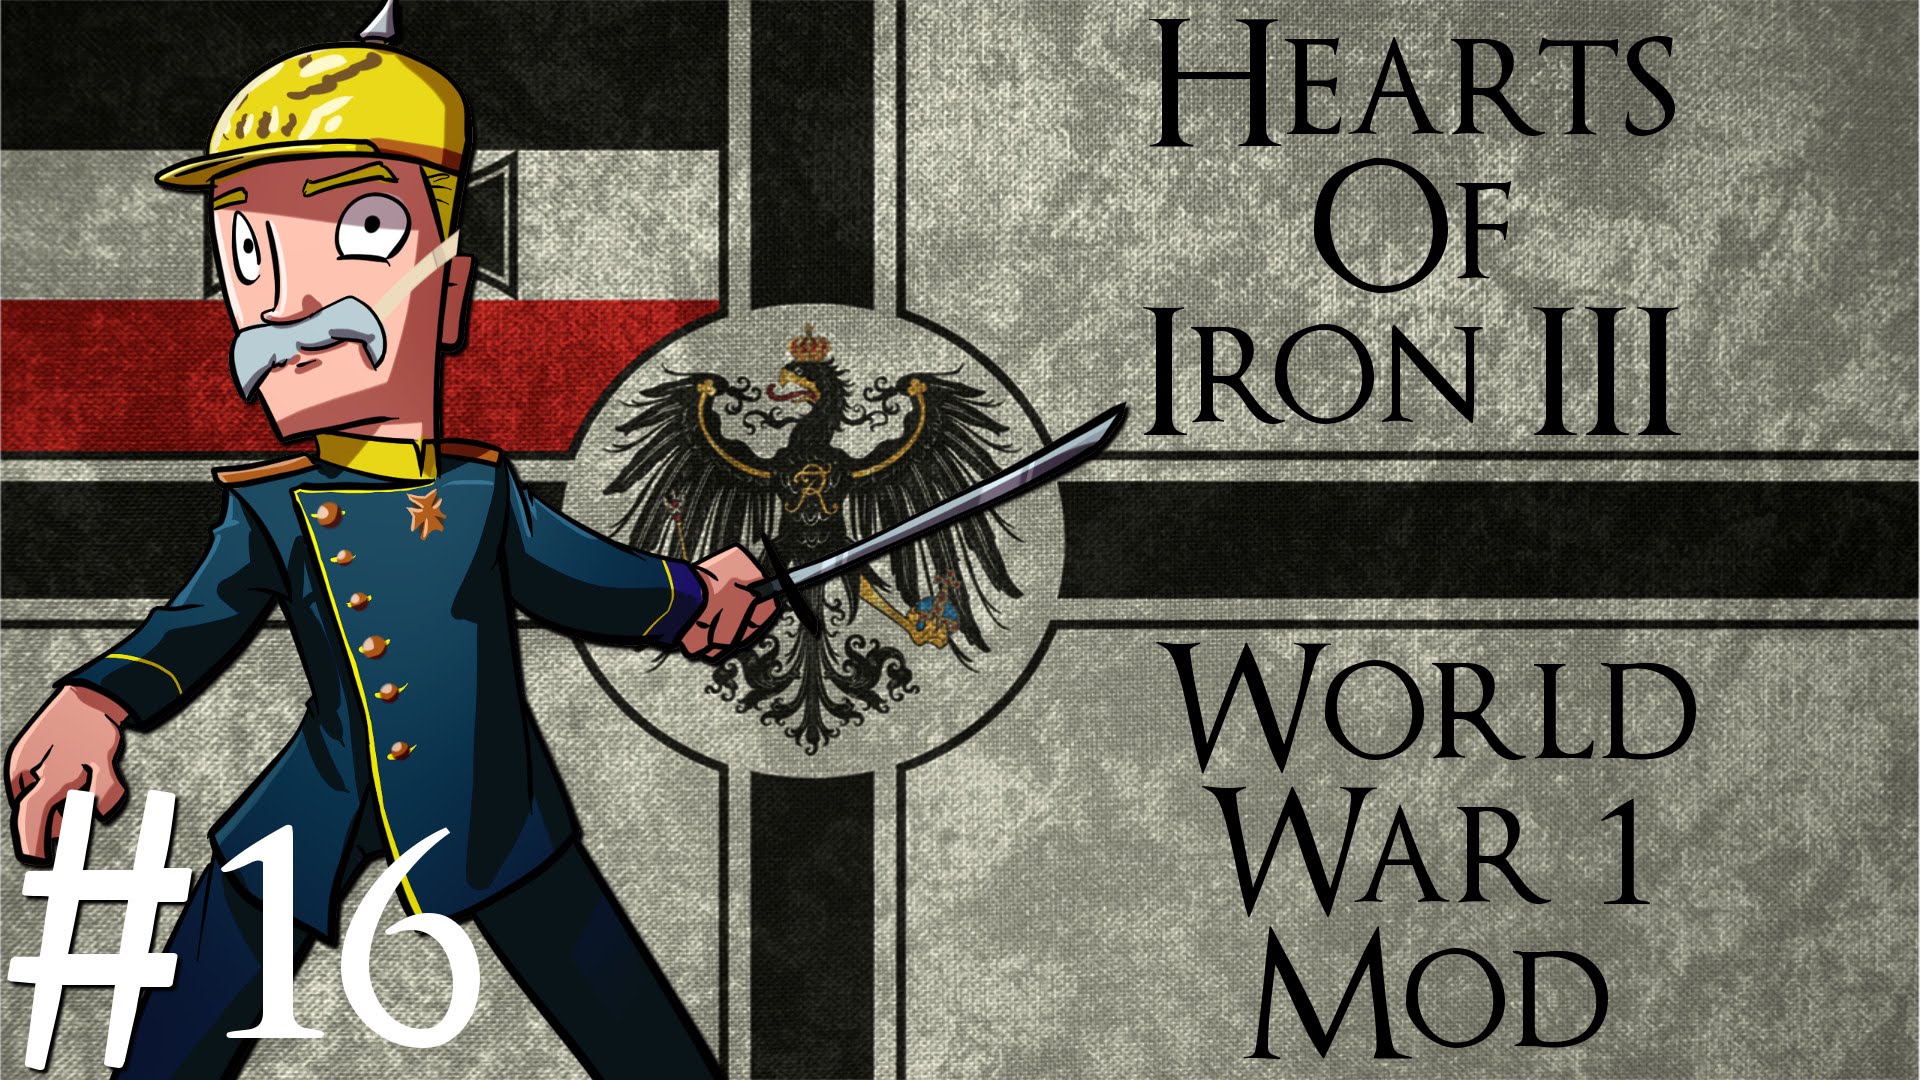 Hearts of Iron 3 | World War 1 mod | German Empire | Part 16 | End Rounding Athens